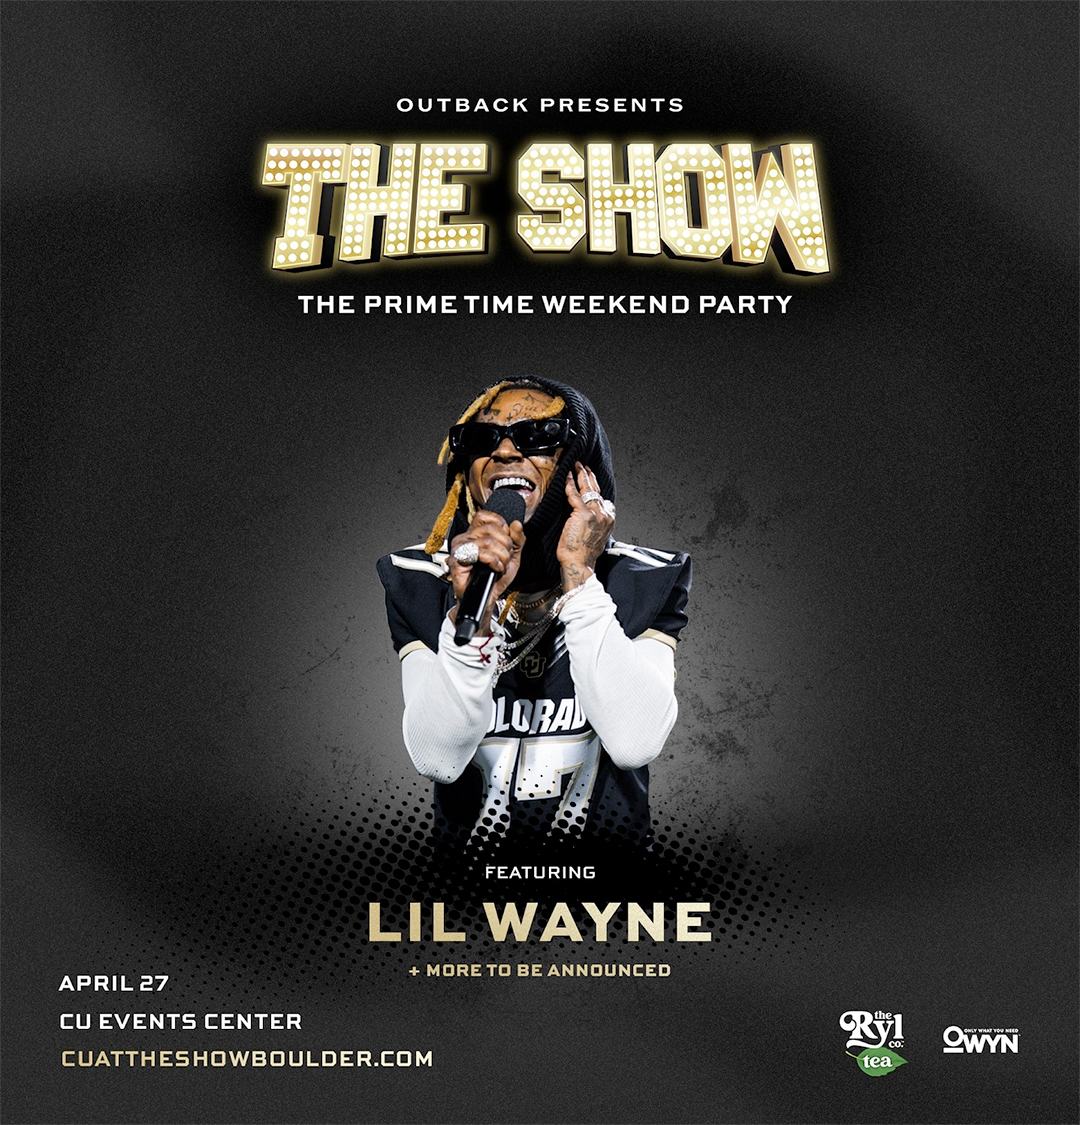 Lil Wayne To Headline The Show - The Prime Time Weekend Party